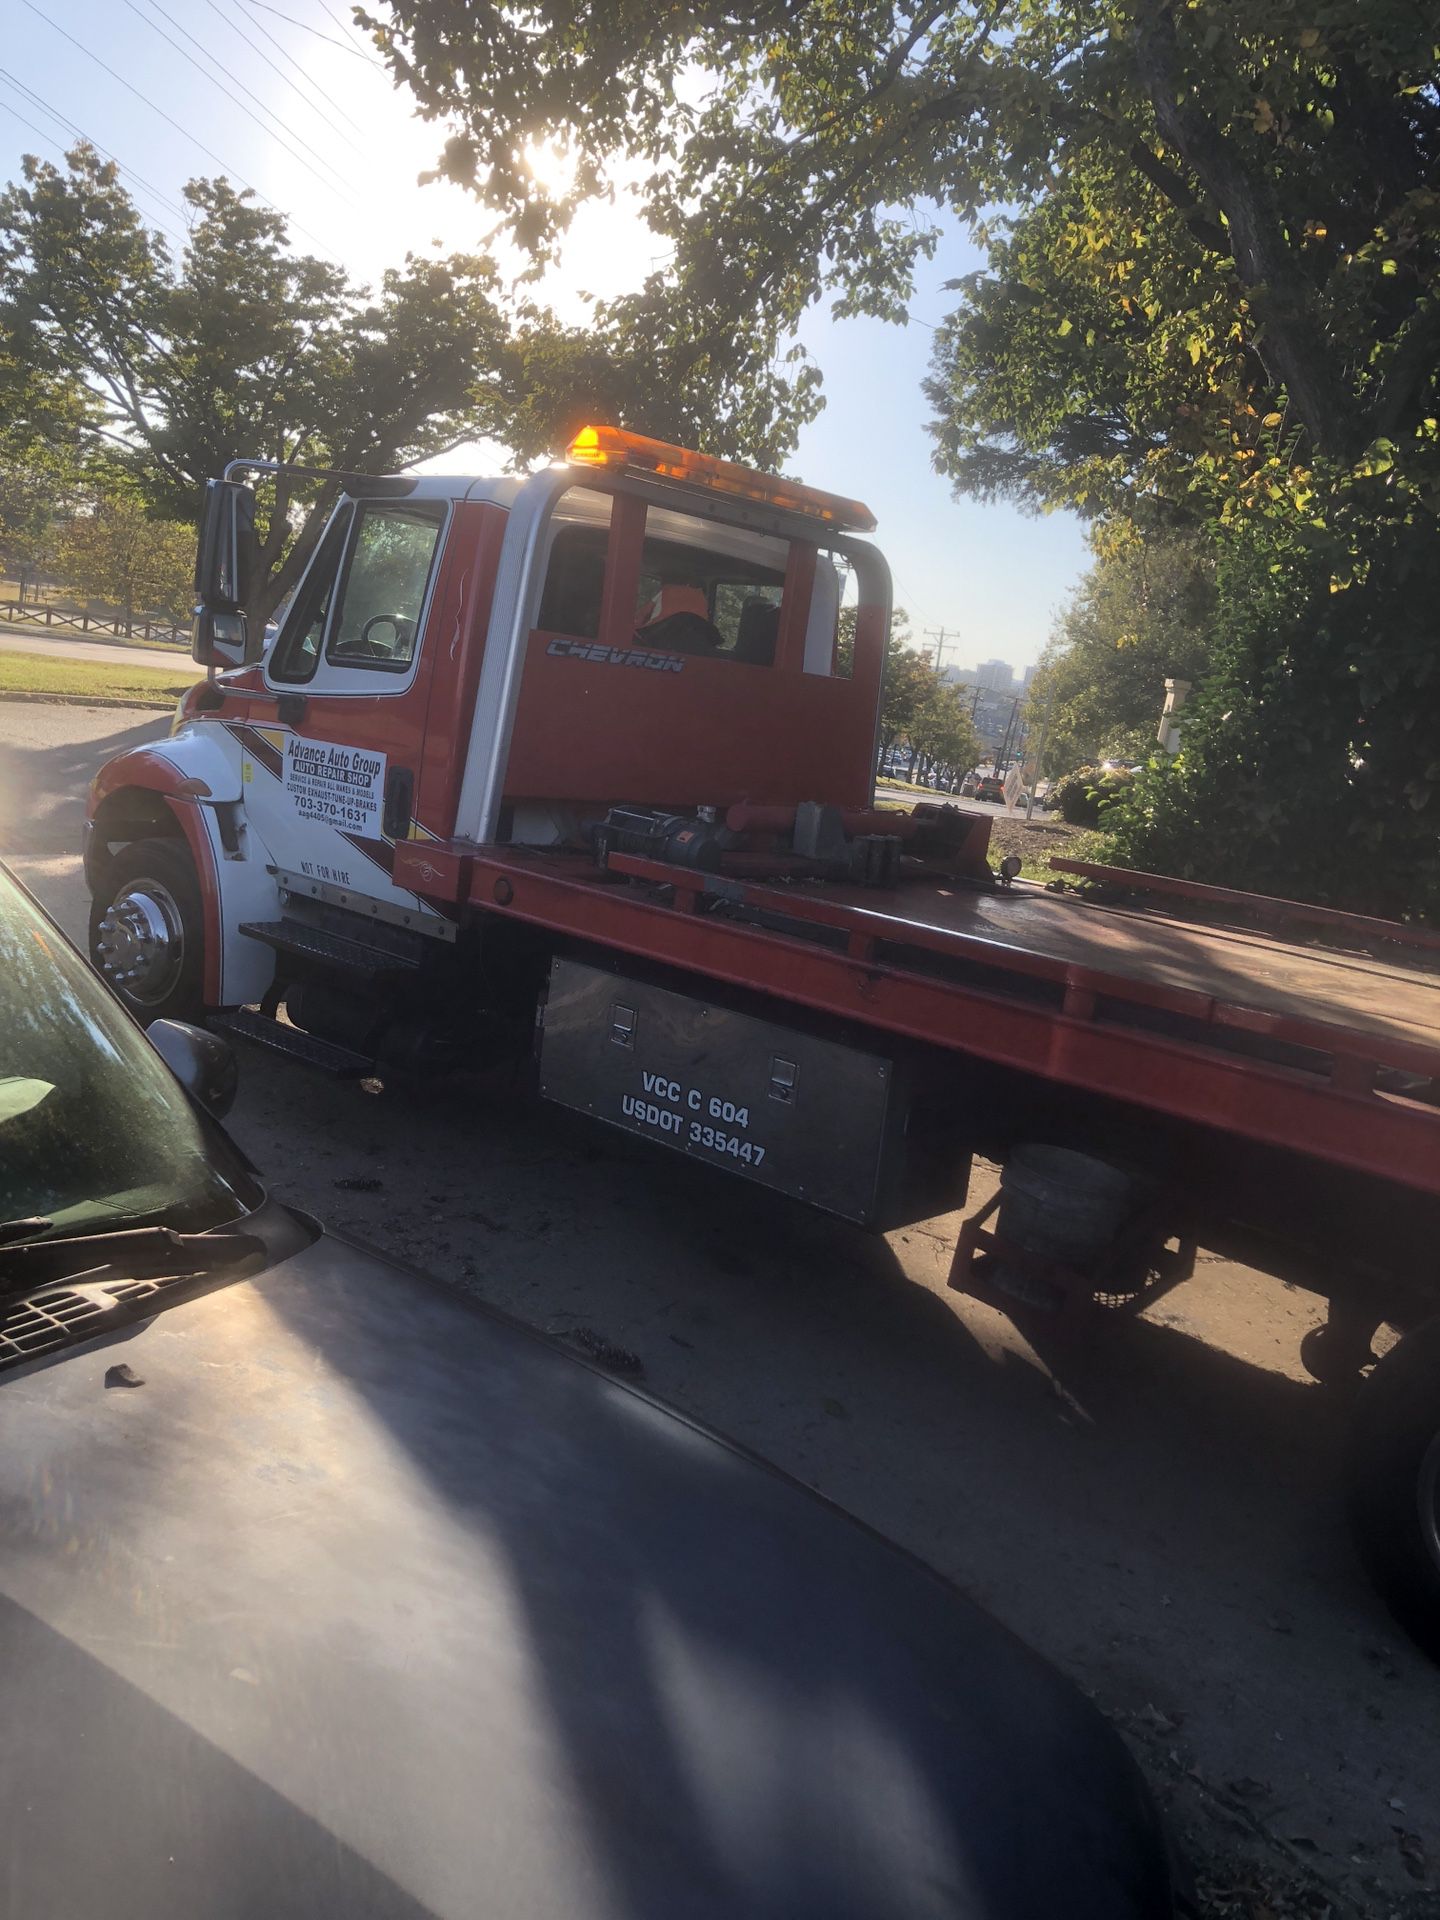 Tow truck roll back for sale low miles and ready to go !!!! No lights on everything working 2009 international air brakes Ect this truck got everythi